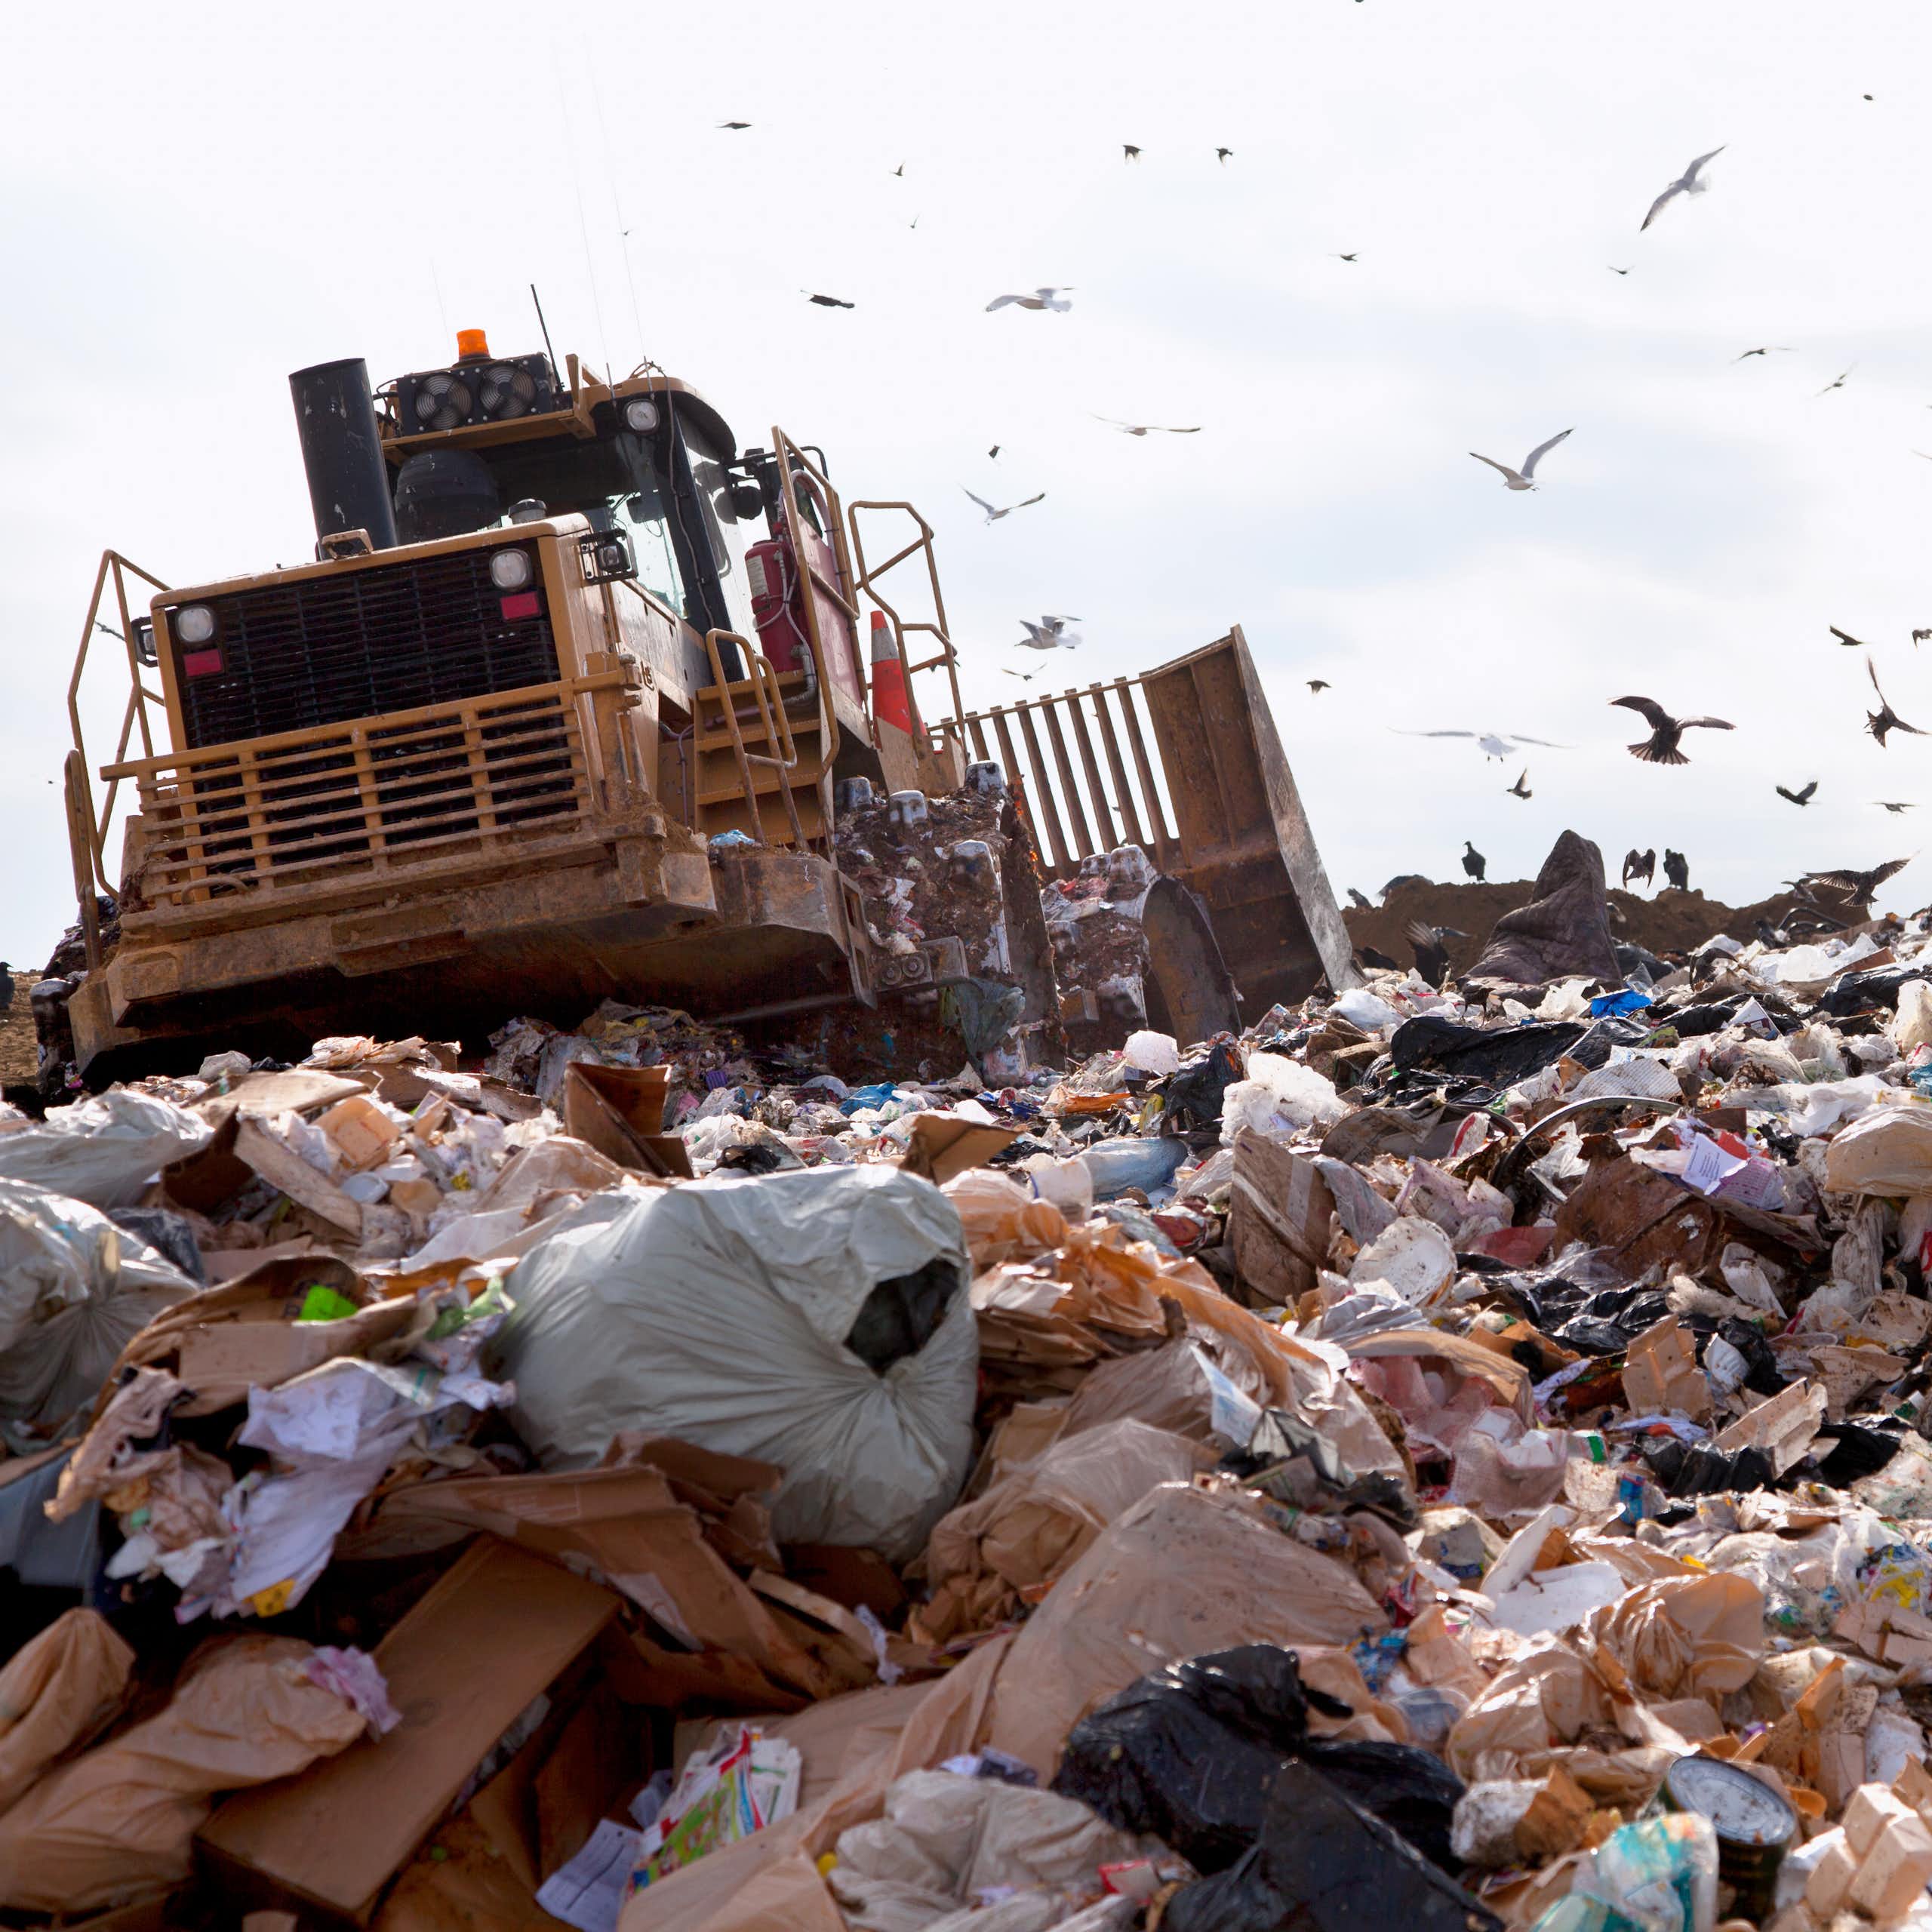 A truck in a landfill with seagulls.